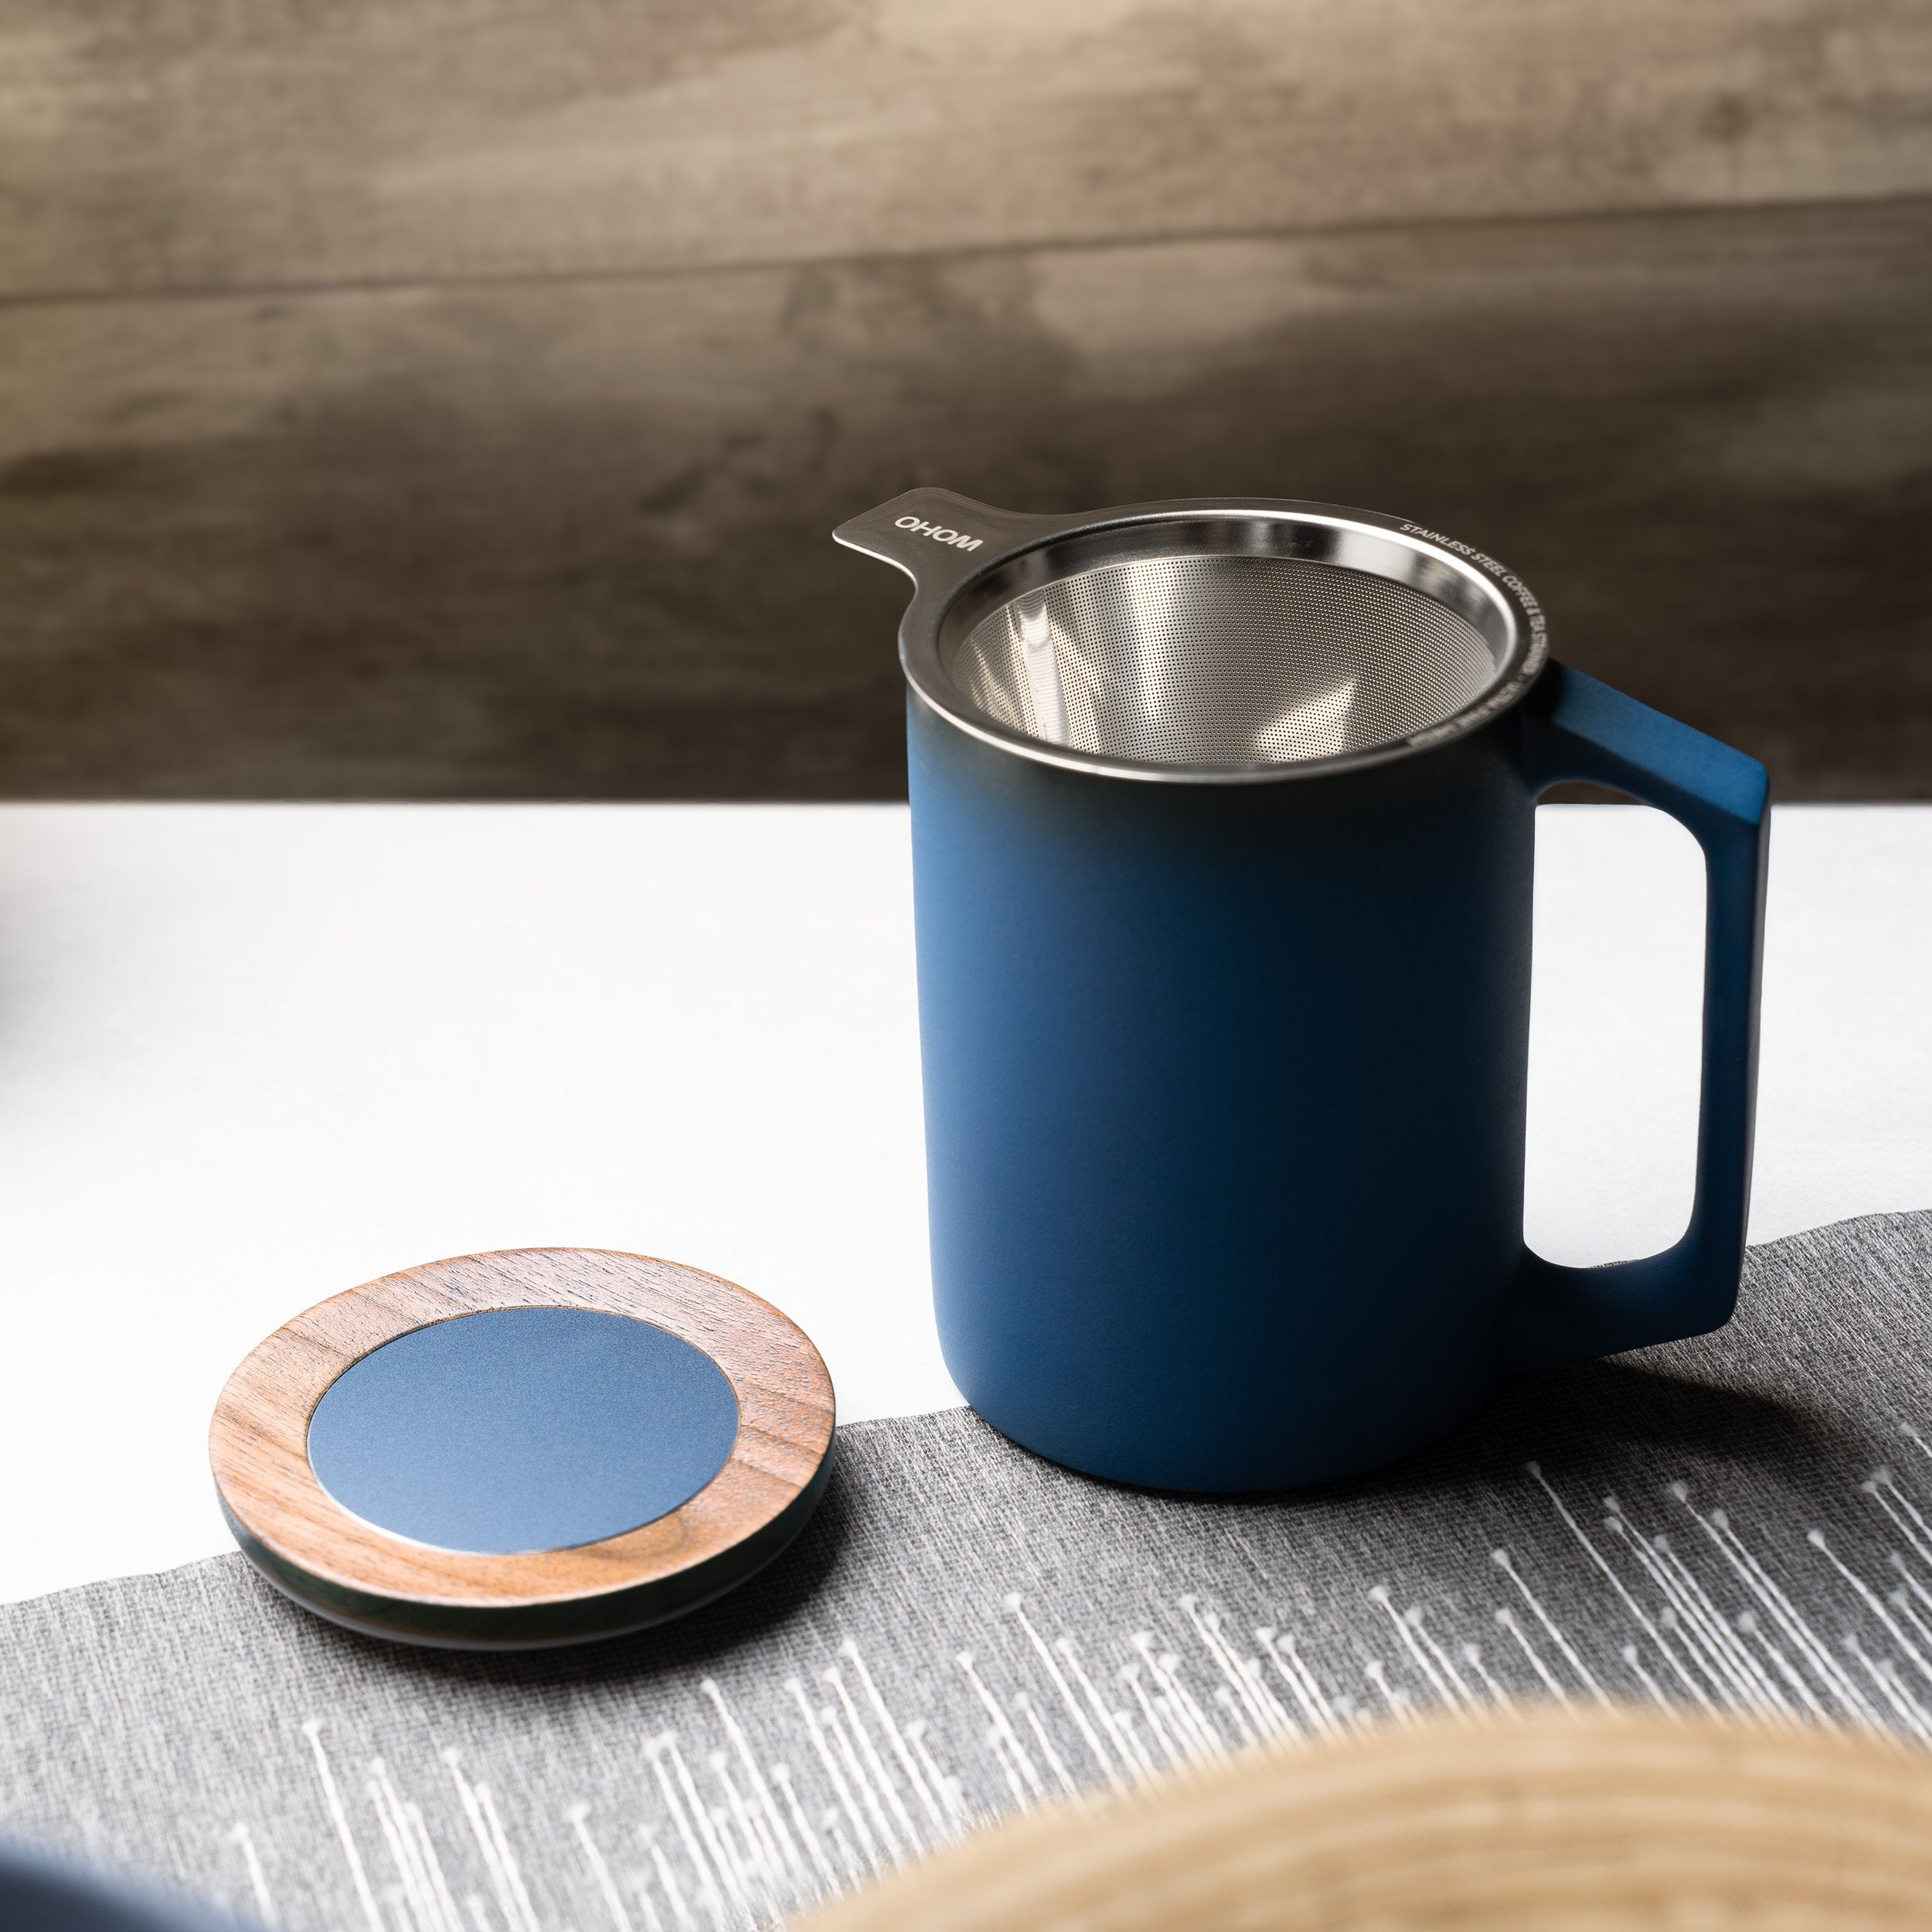 Dark blue mug with design and strainer and lid